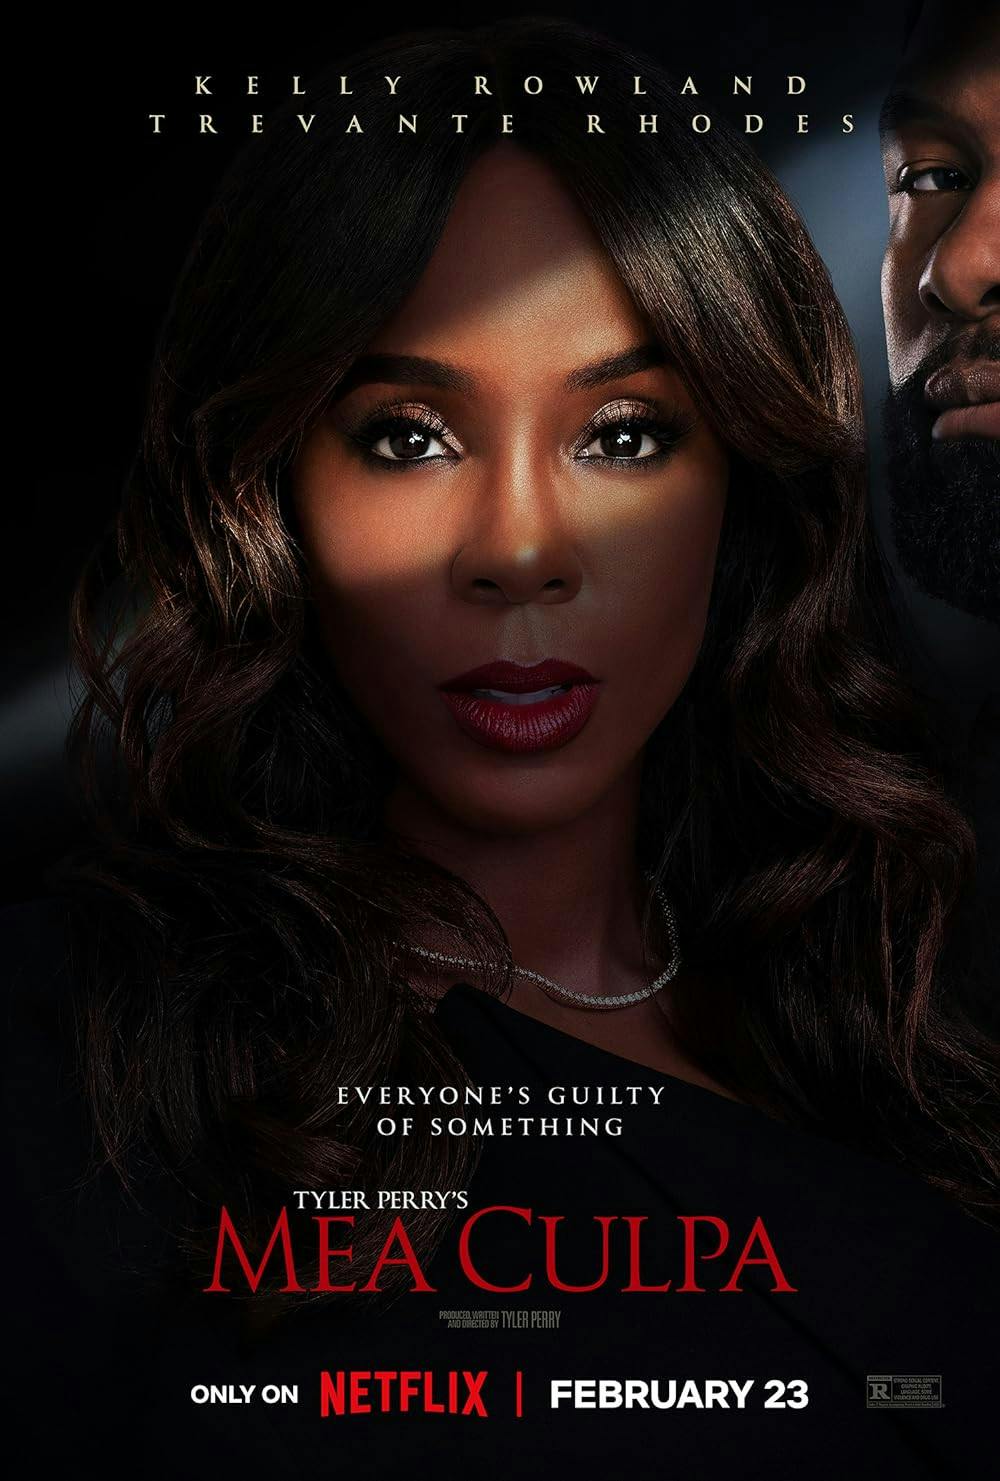 Review: Tyler Perry's 'Mea Culpa' reveals intriguing plot twists